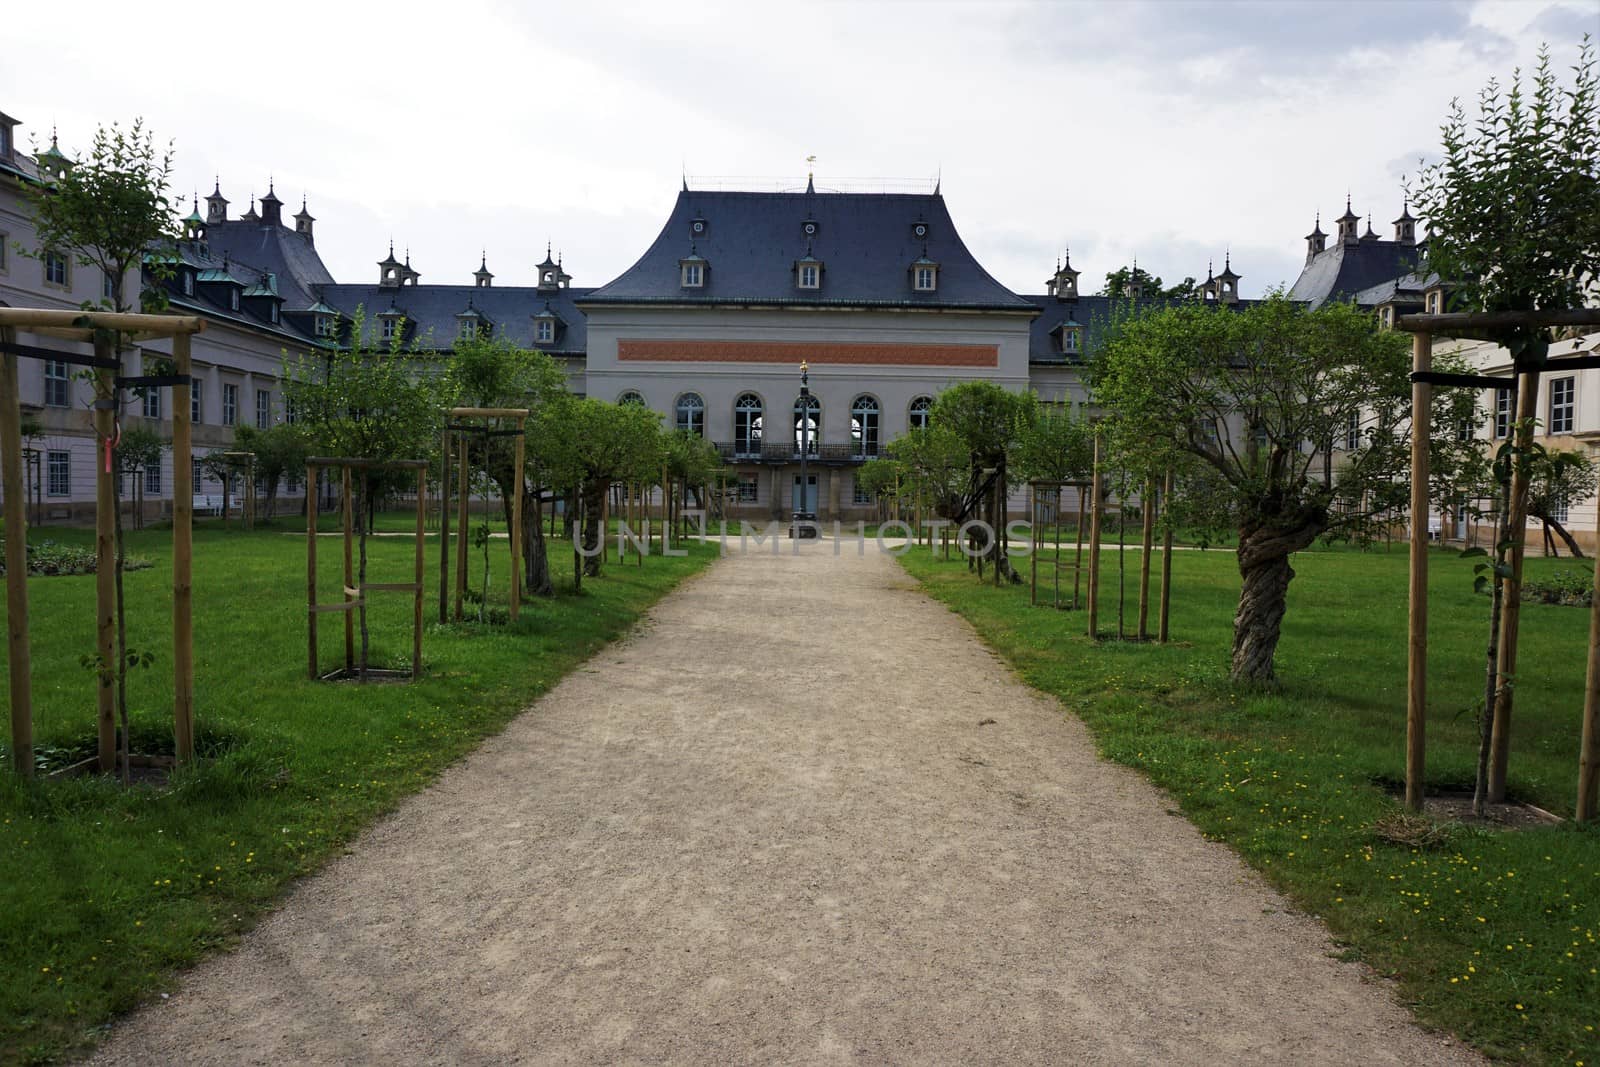 Garden surrounding the New Palace of Pillnitz Castle in Dresden, Germany